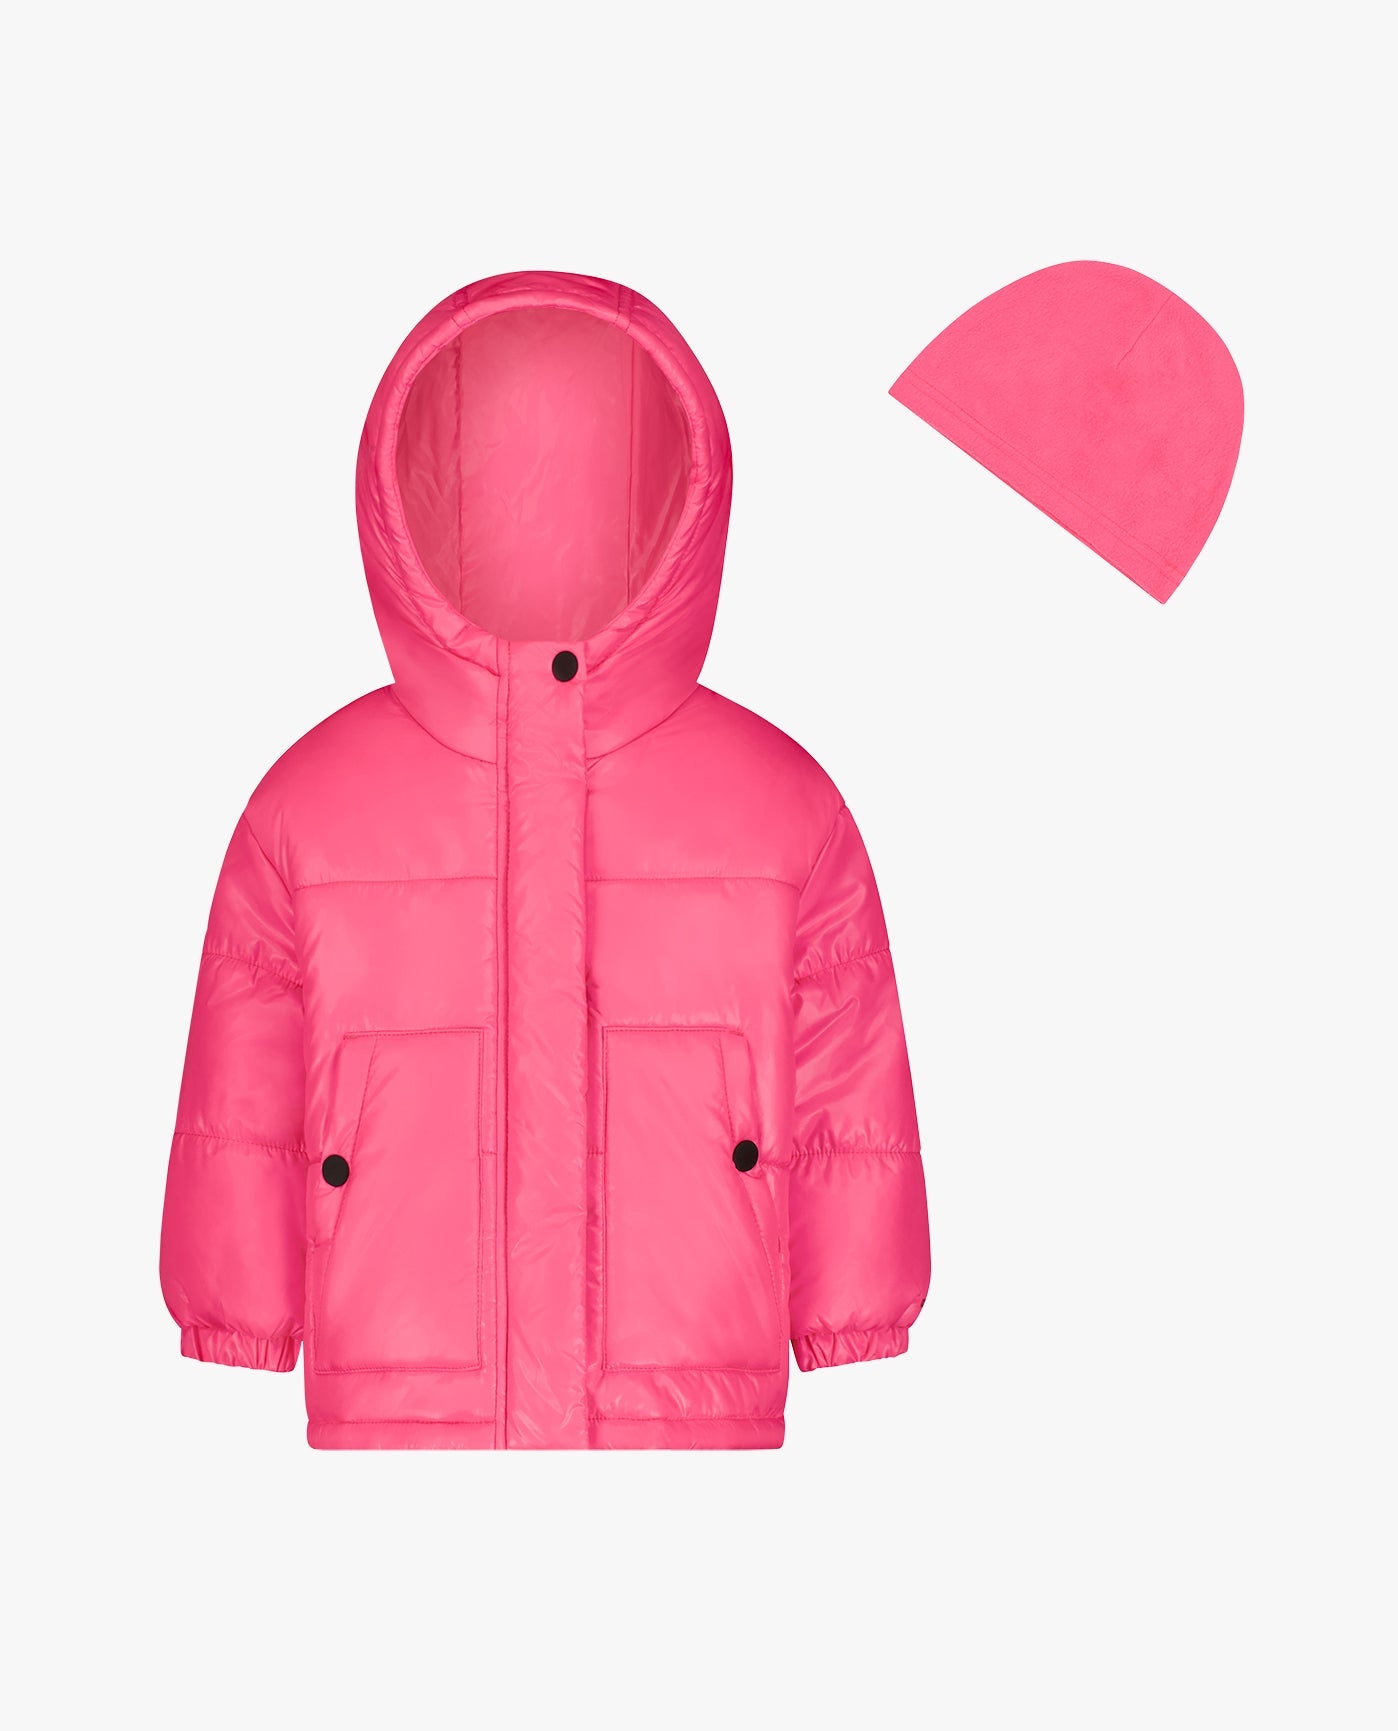 Detail View Of TODDLER GIRLS ZIP-FRONT HEAVY WEIGHT PUFFER | HOT PINK